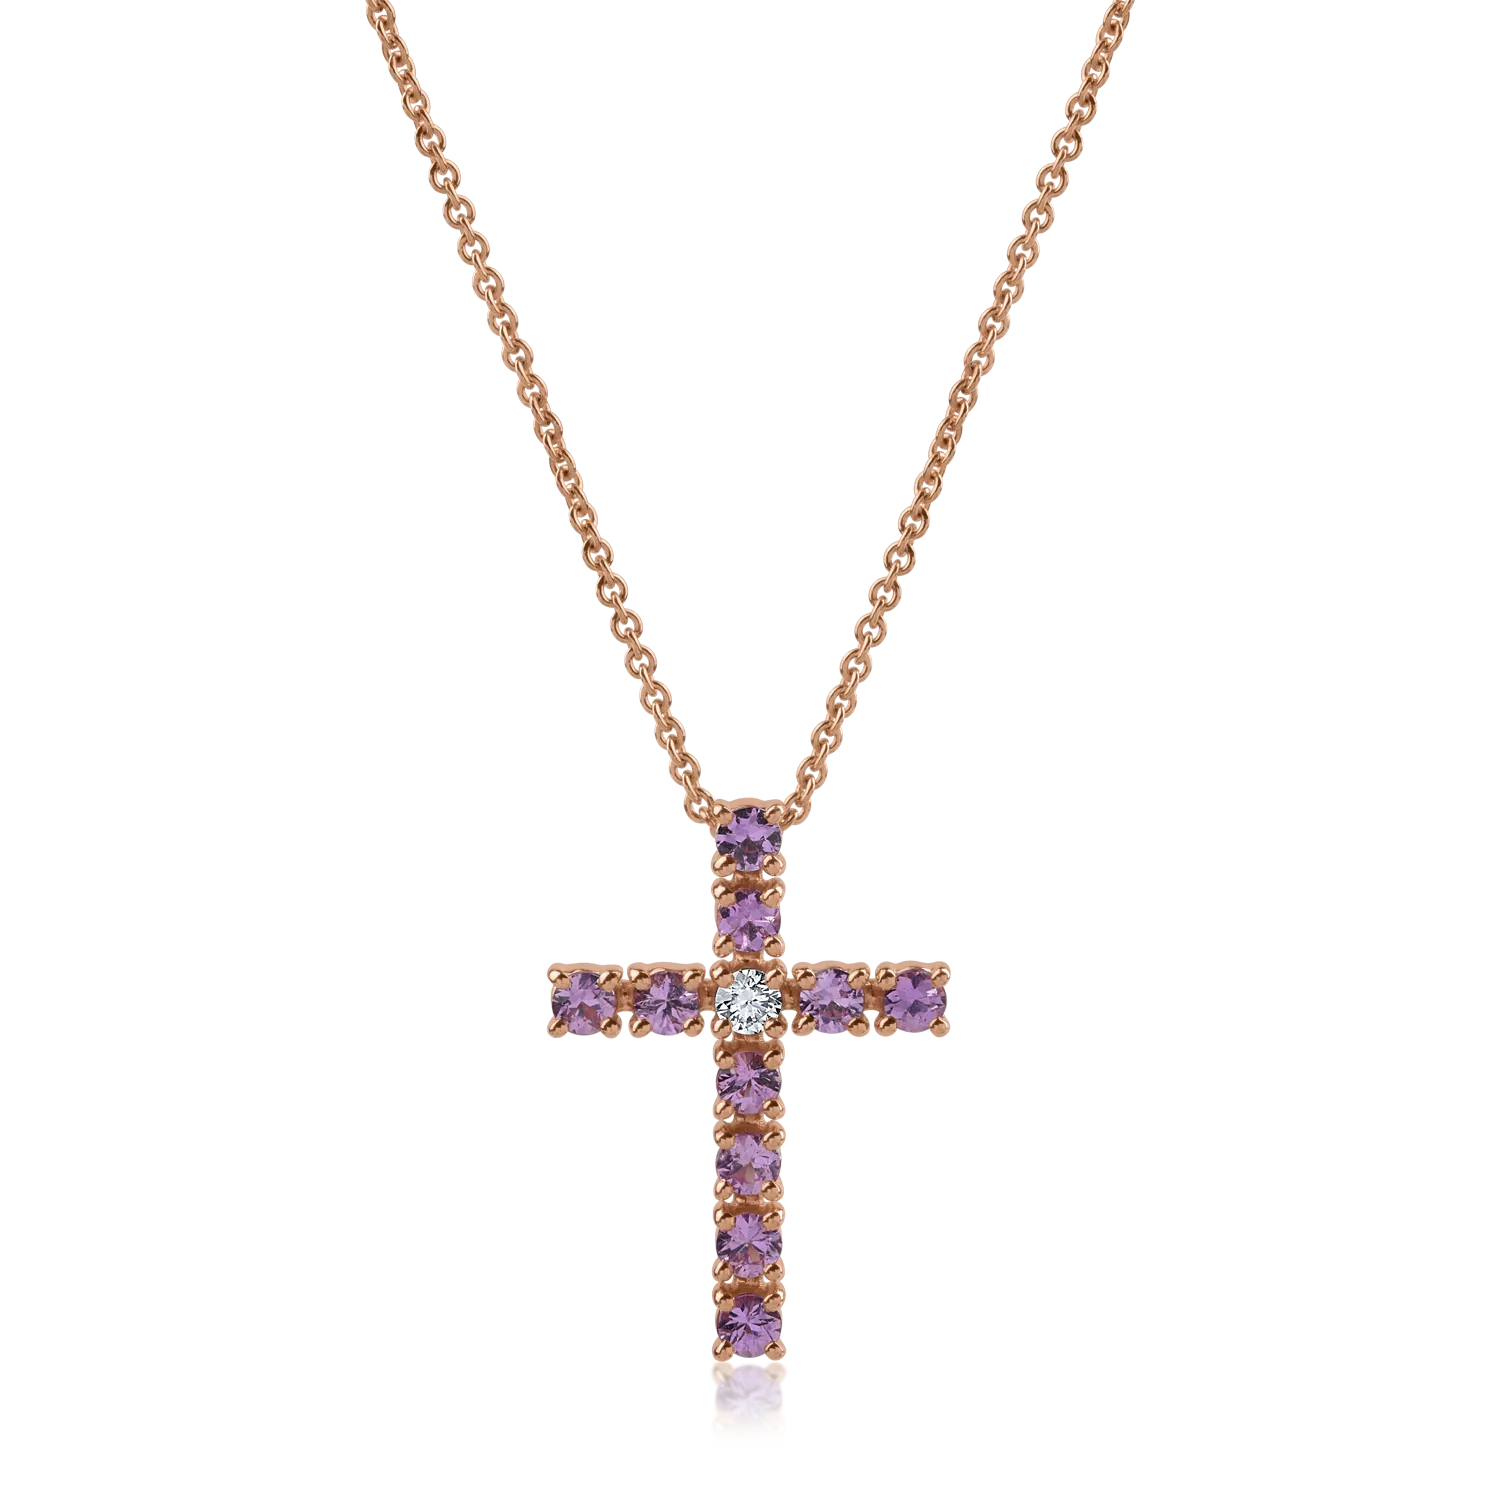 Rose gold pendant necklace with 0.95ct pink sapphires and 0.08ct diamond